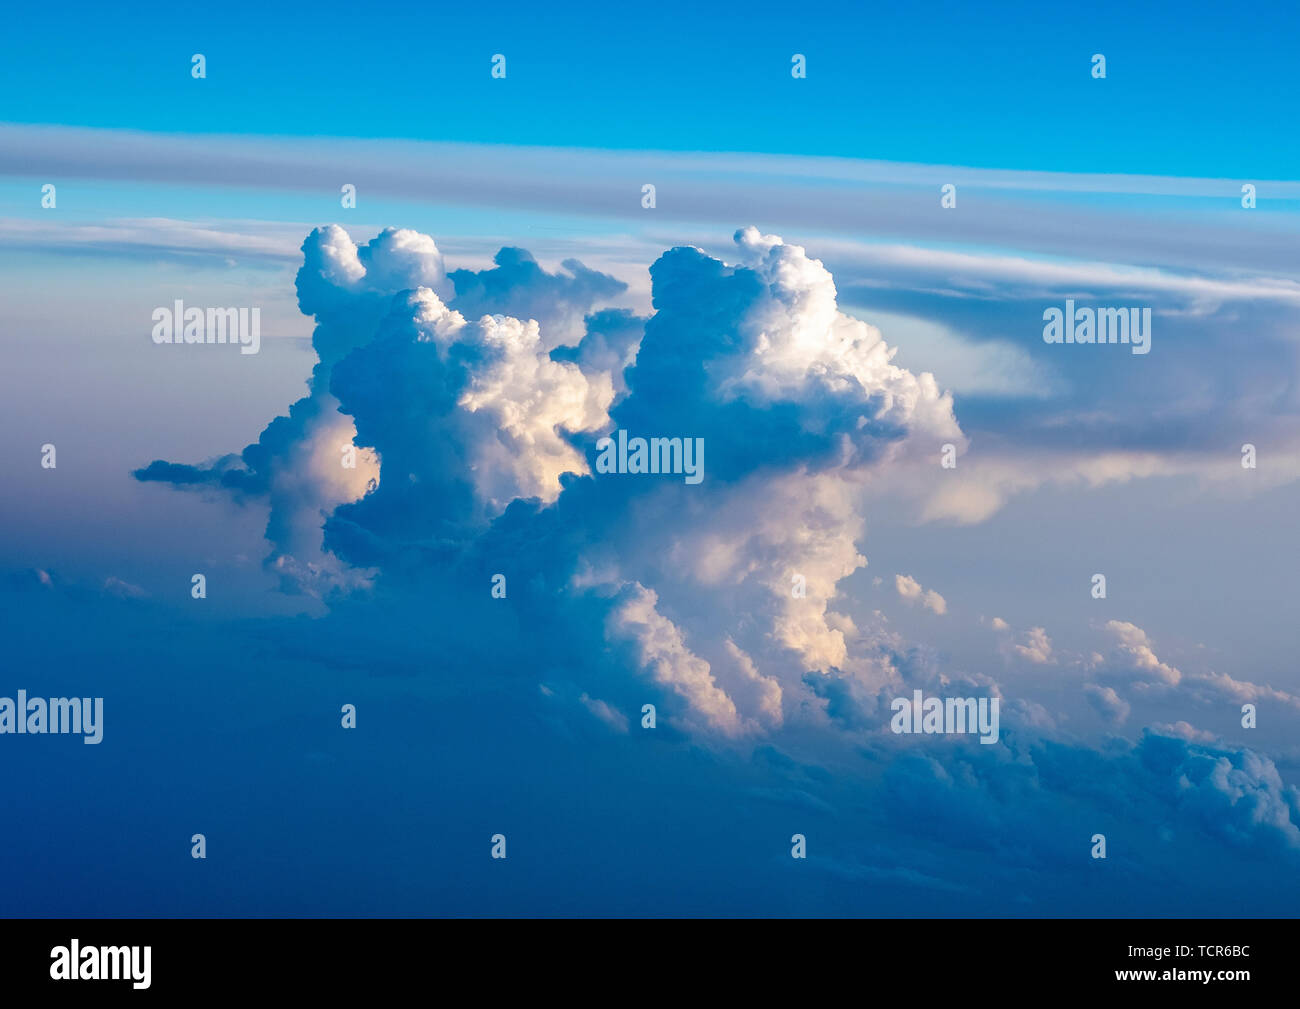 Dramatic Cumulonimbus cloud formations at sunset taken from an aircraft window over southern europe. Stock Photo